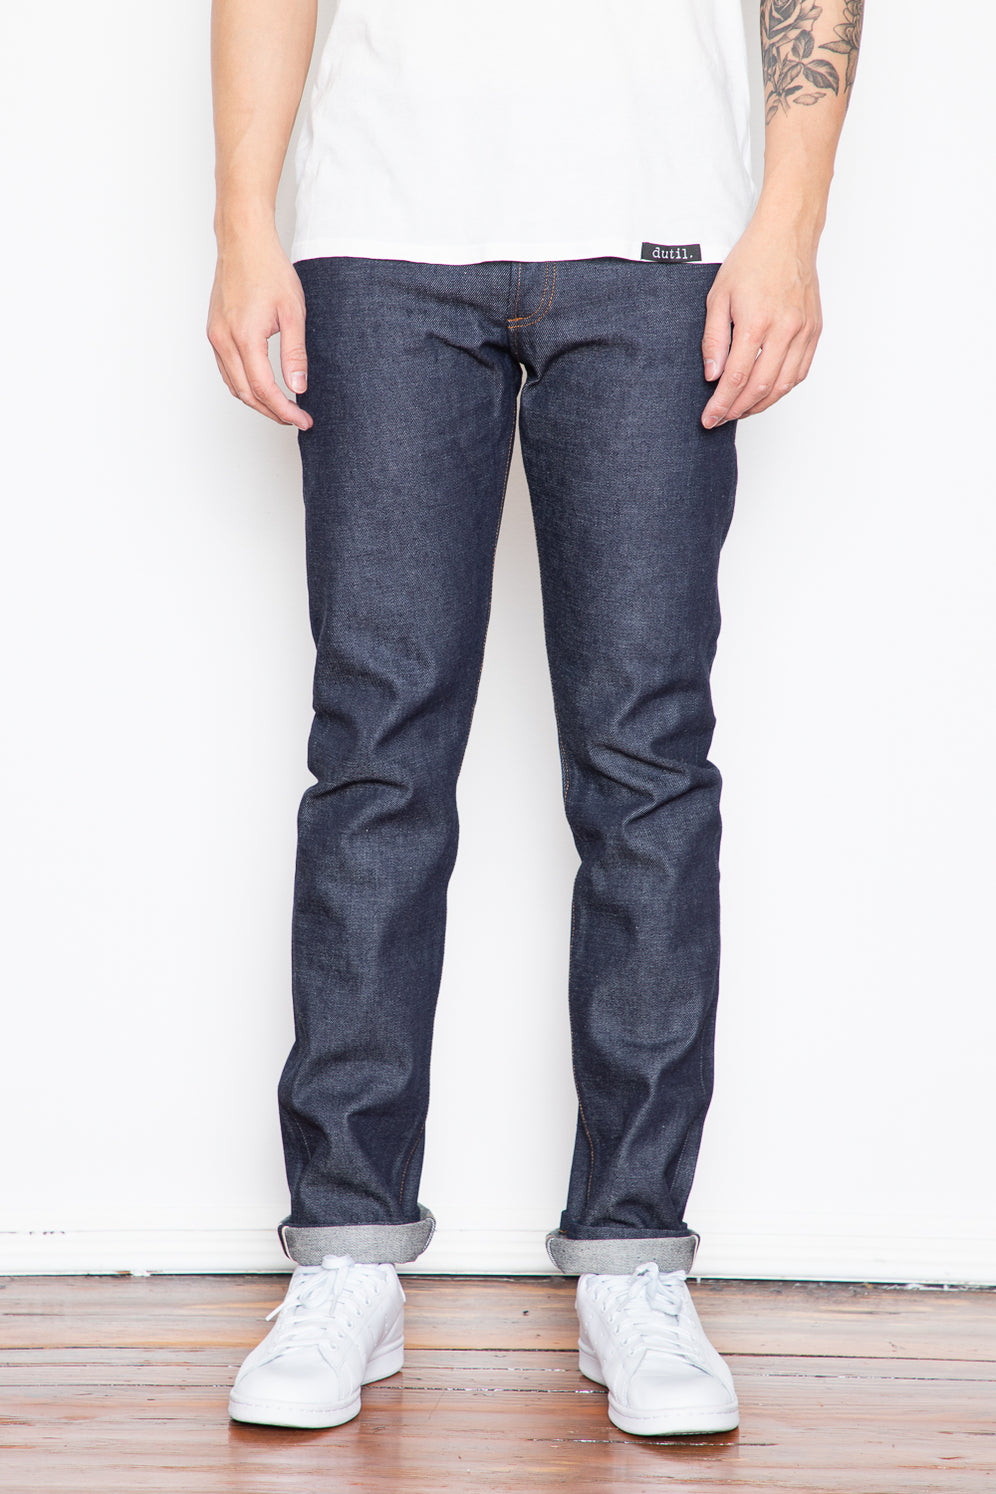 Browse though Men's Jeans from APC- Canada & USA – Dutil Denim